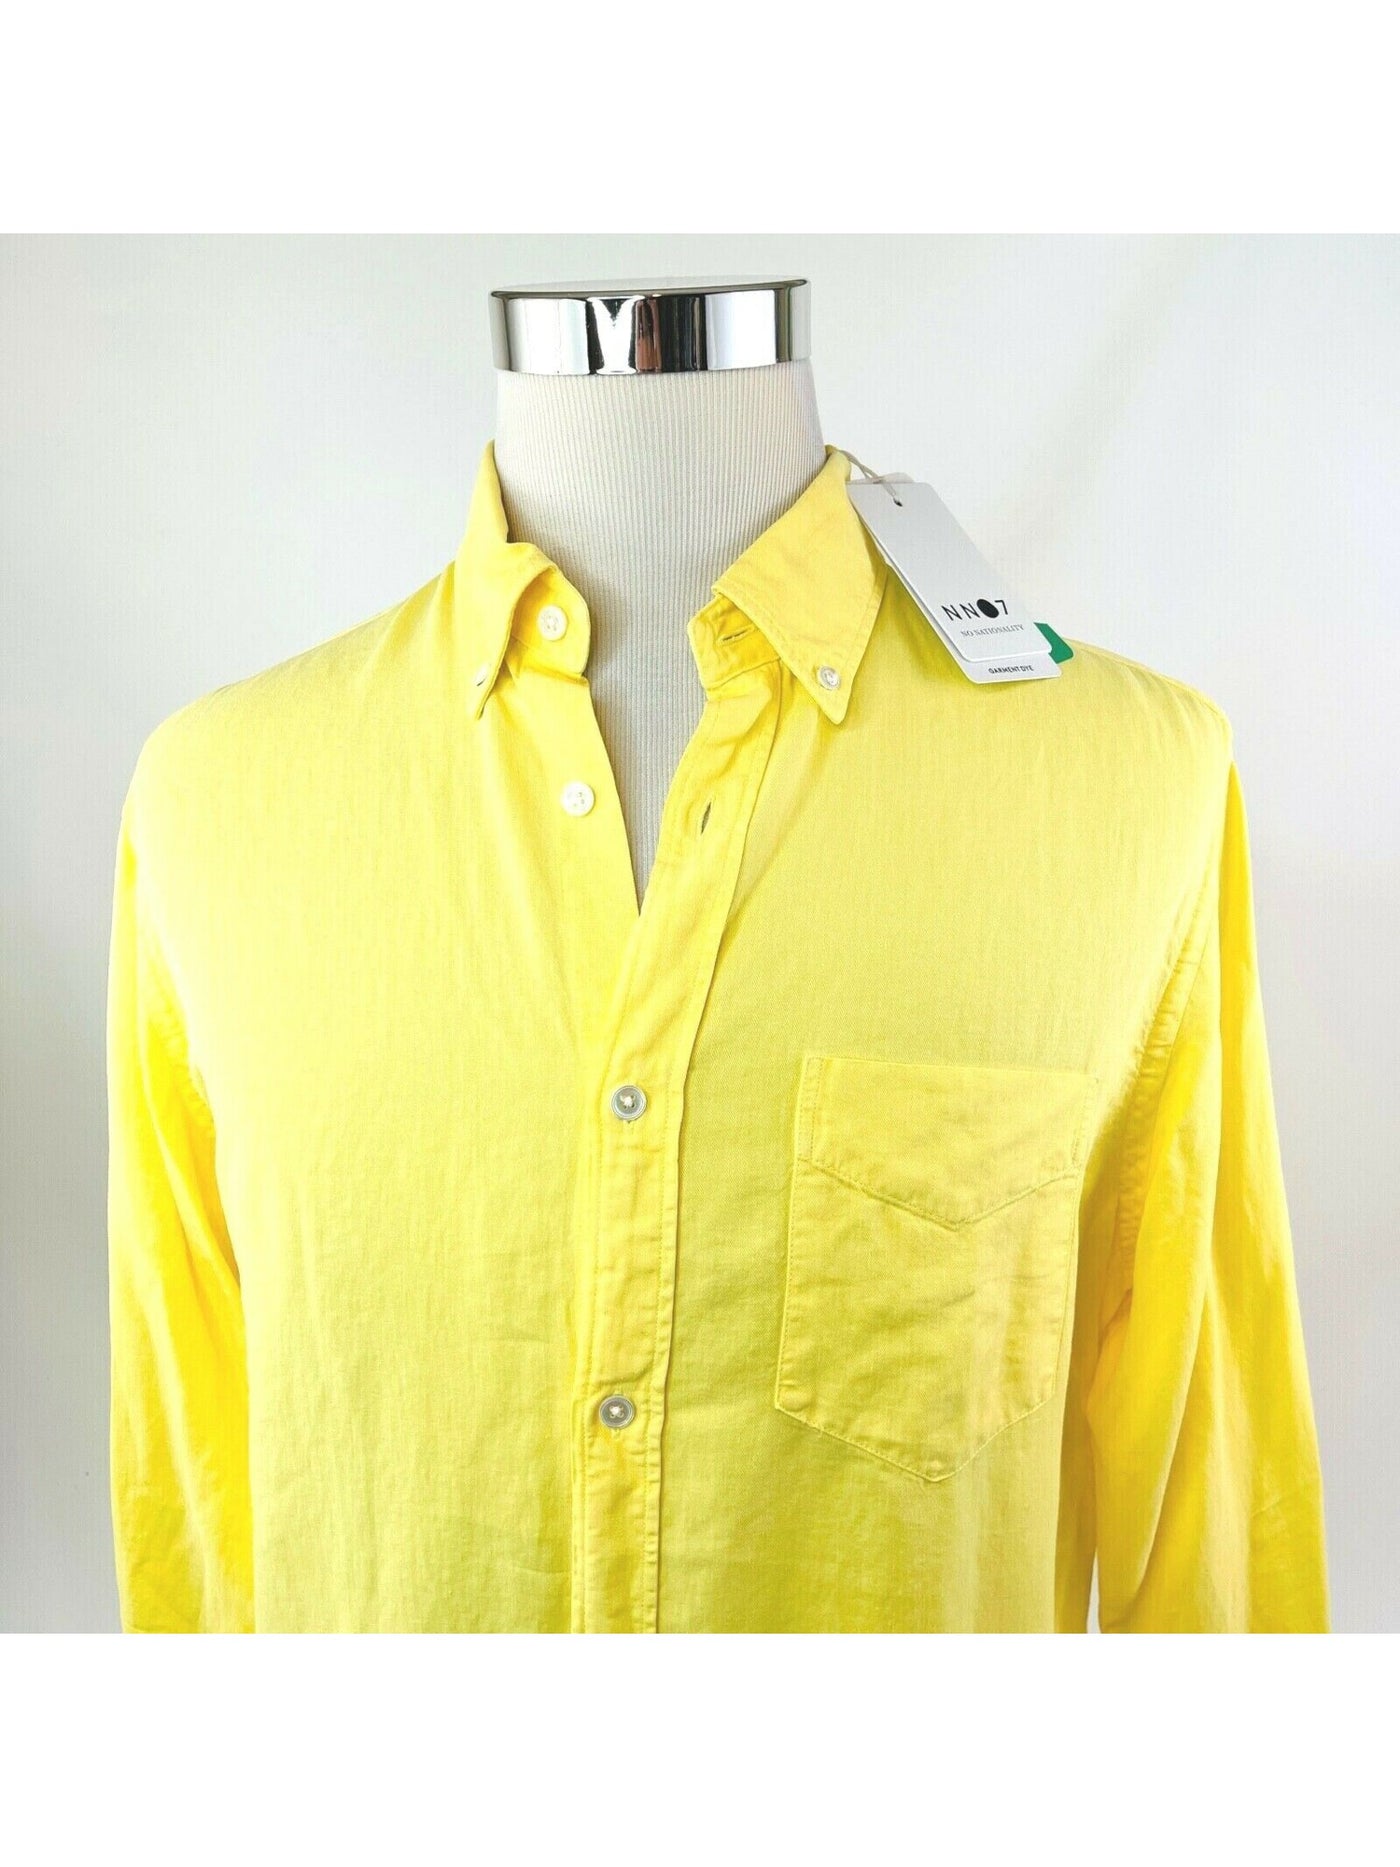 NO NATIONALITY Mens Yellow Long Sleeve Classic Fit Button Down Casual Shirt L